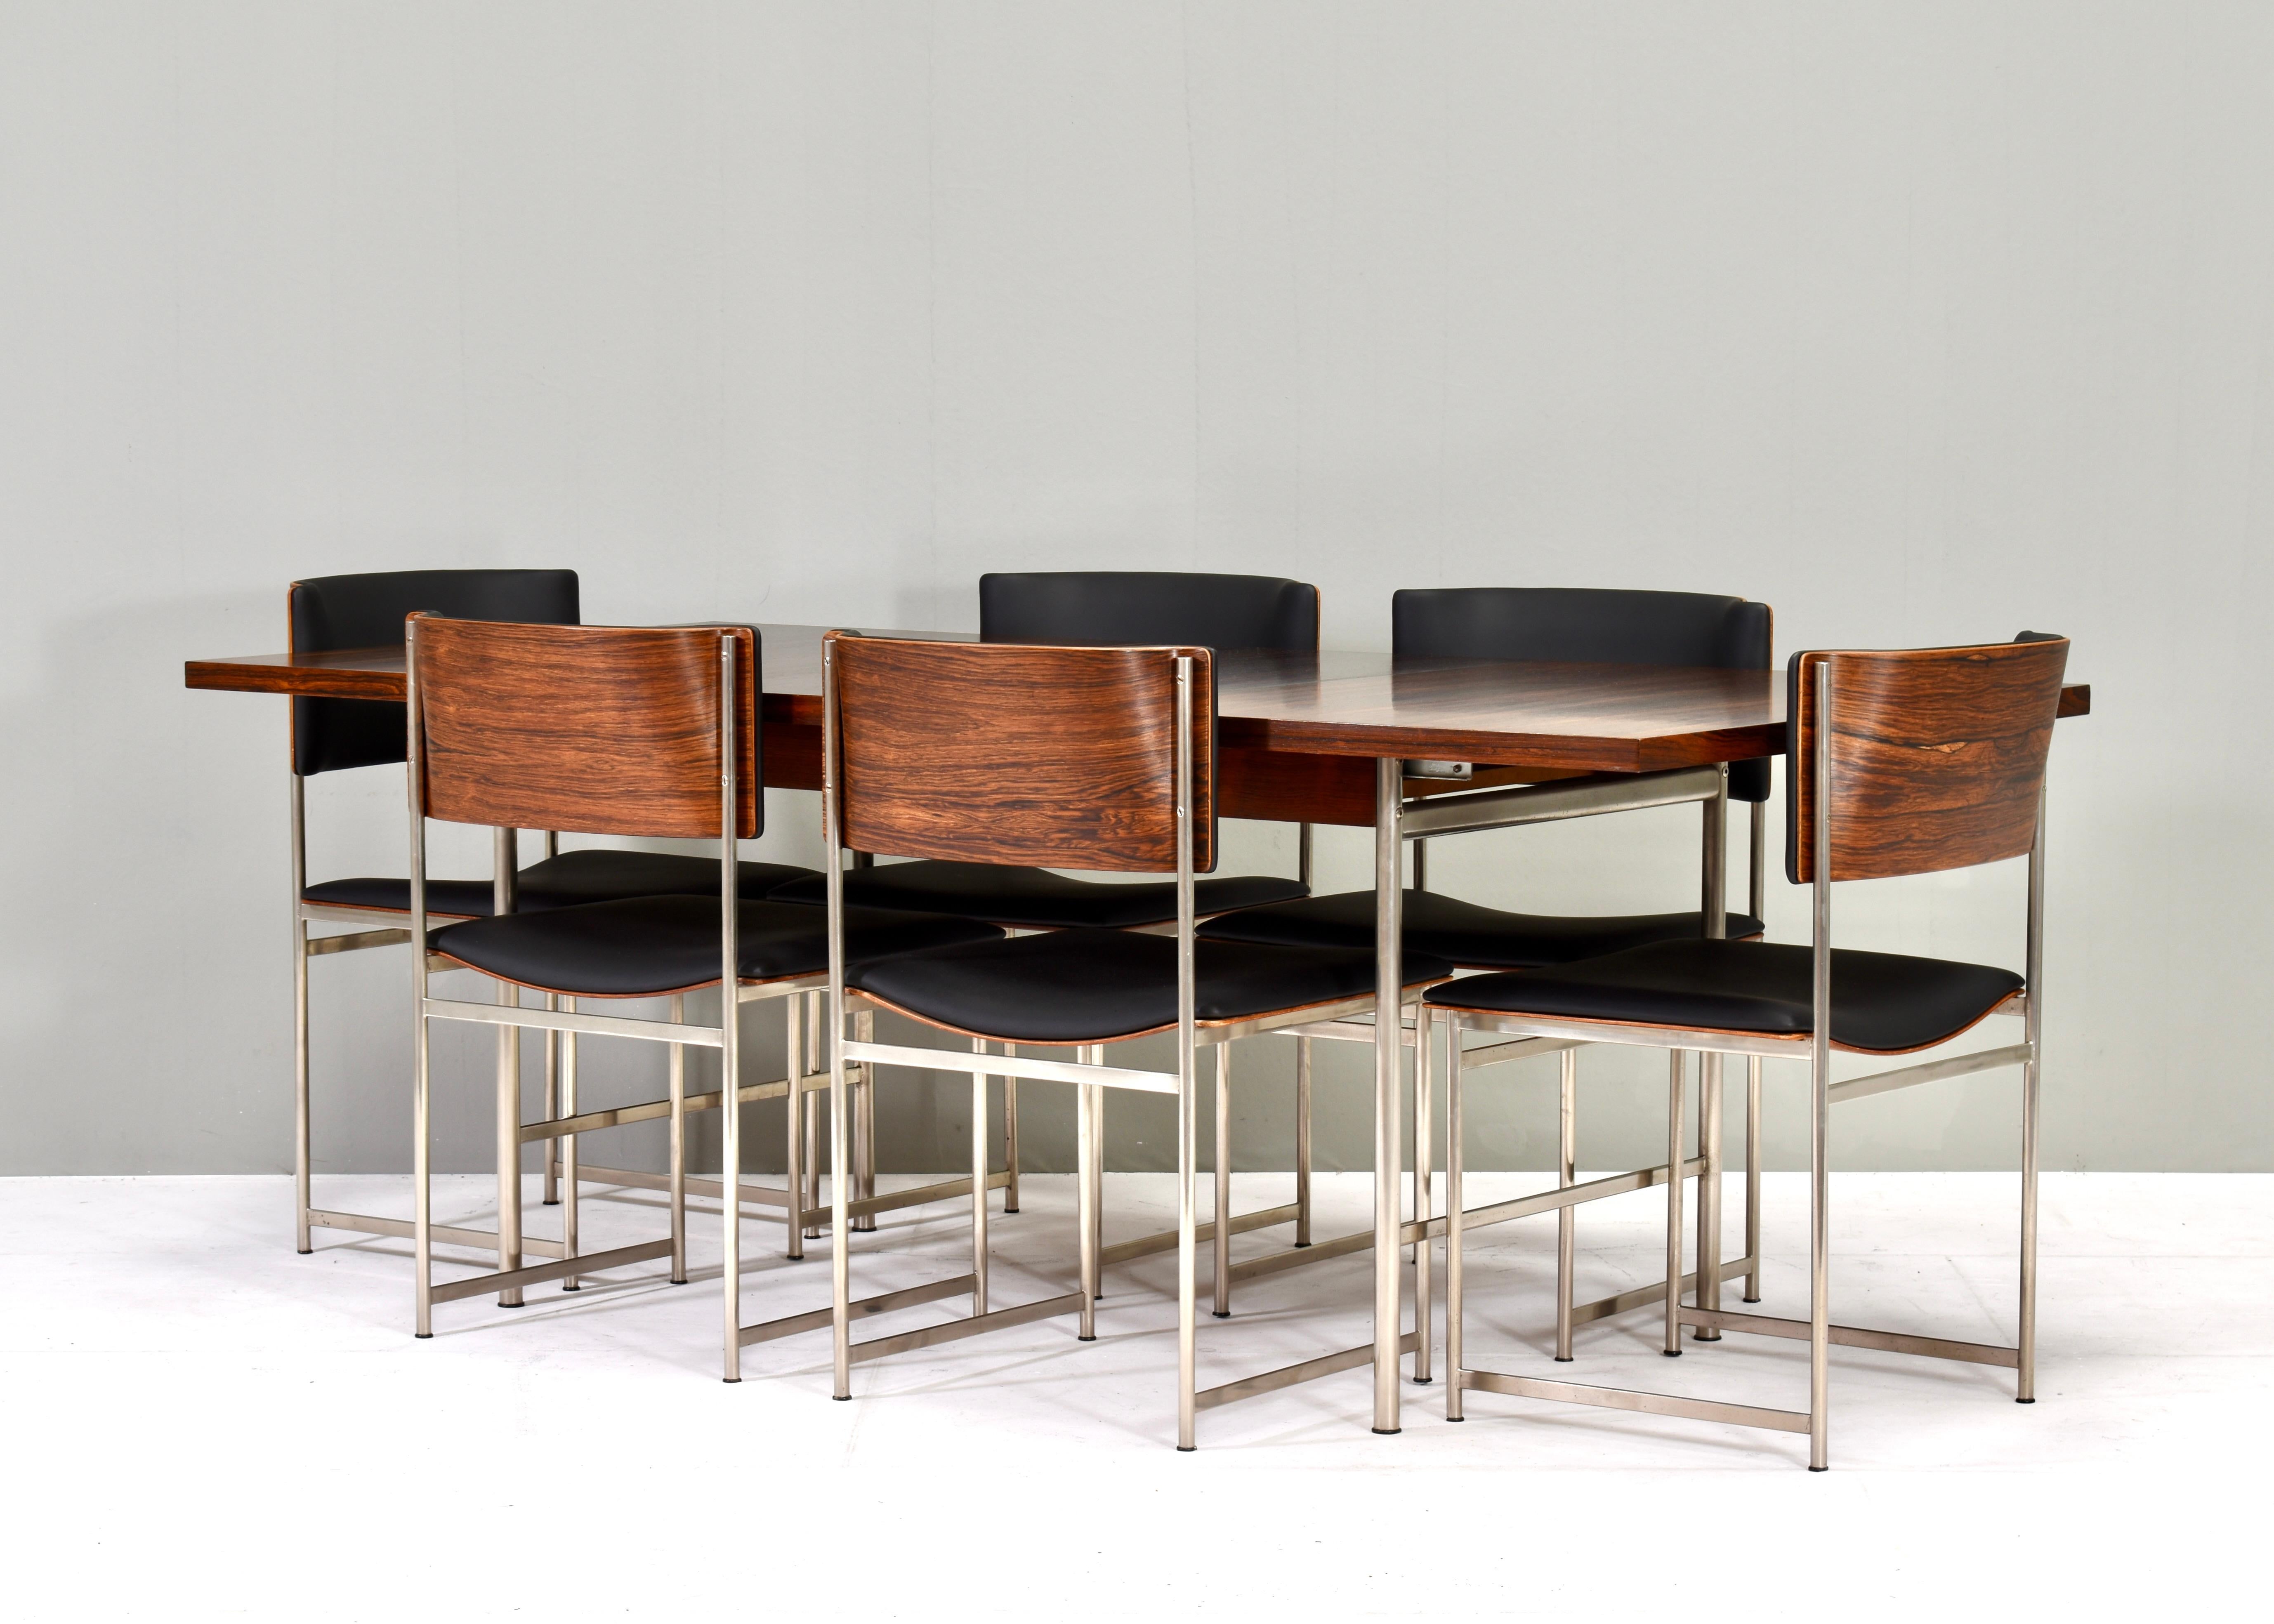 Gorgeous and rare model SM-08 dining set by Cees Braakman.
The backs and seats are made of molded venered wood.
The table top and plywood backs have been refinished. The chairs have been re-upholstered in beautiful high quality black faux leather,